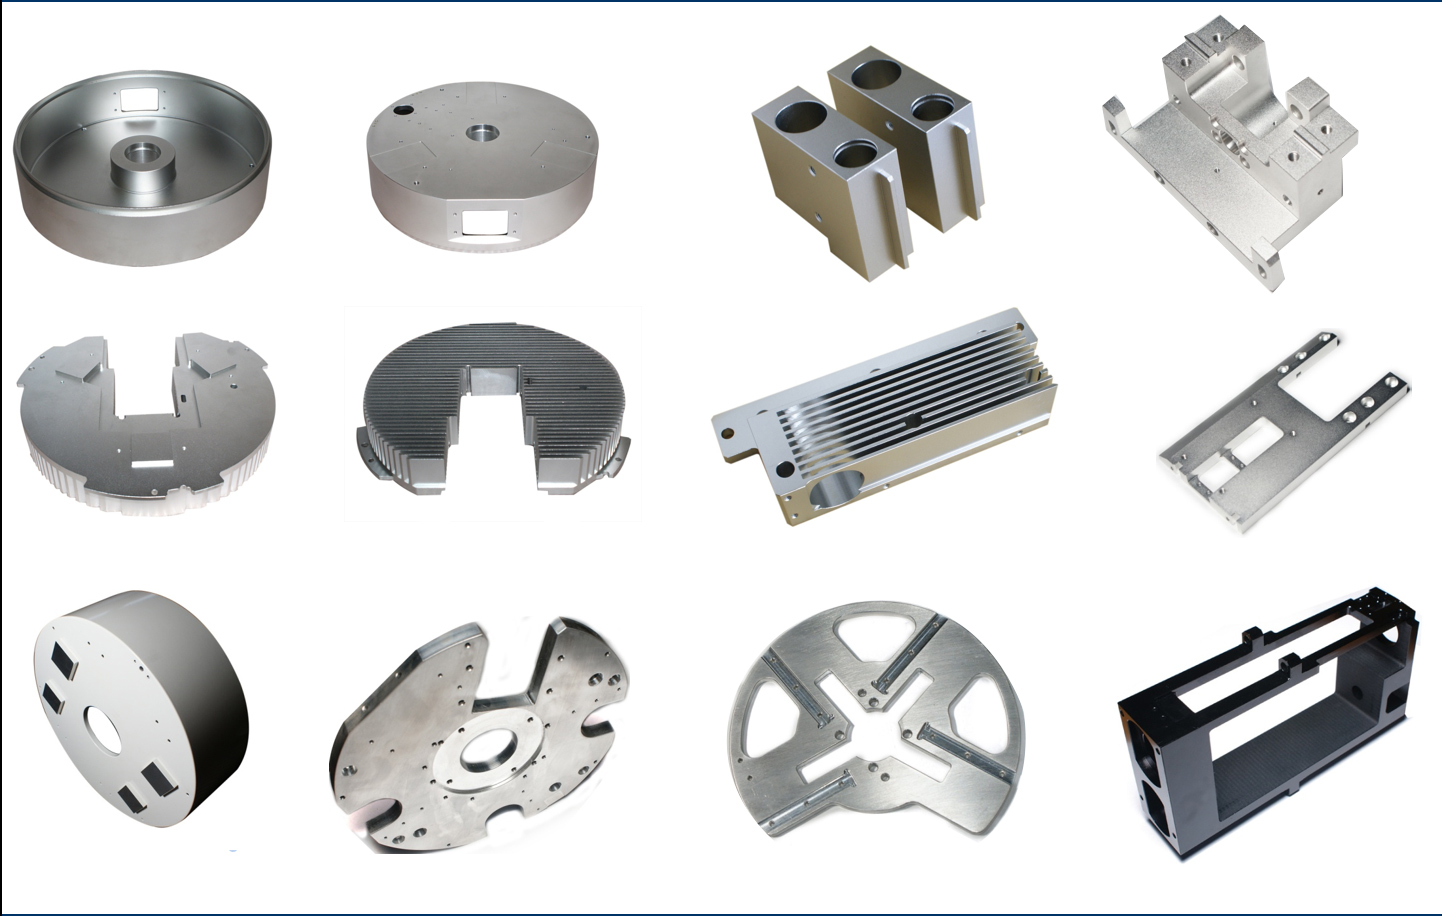 2012 Provide machining parts for blood testing devices